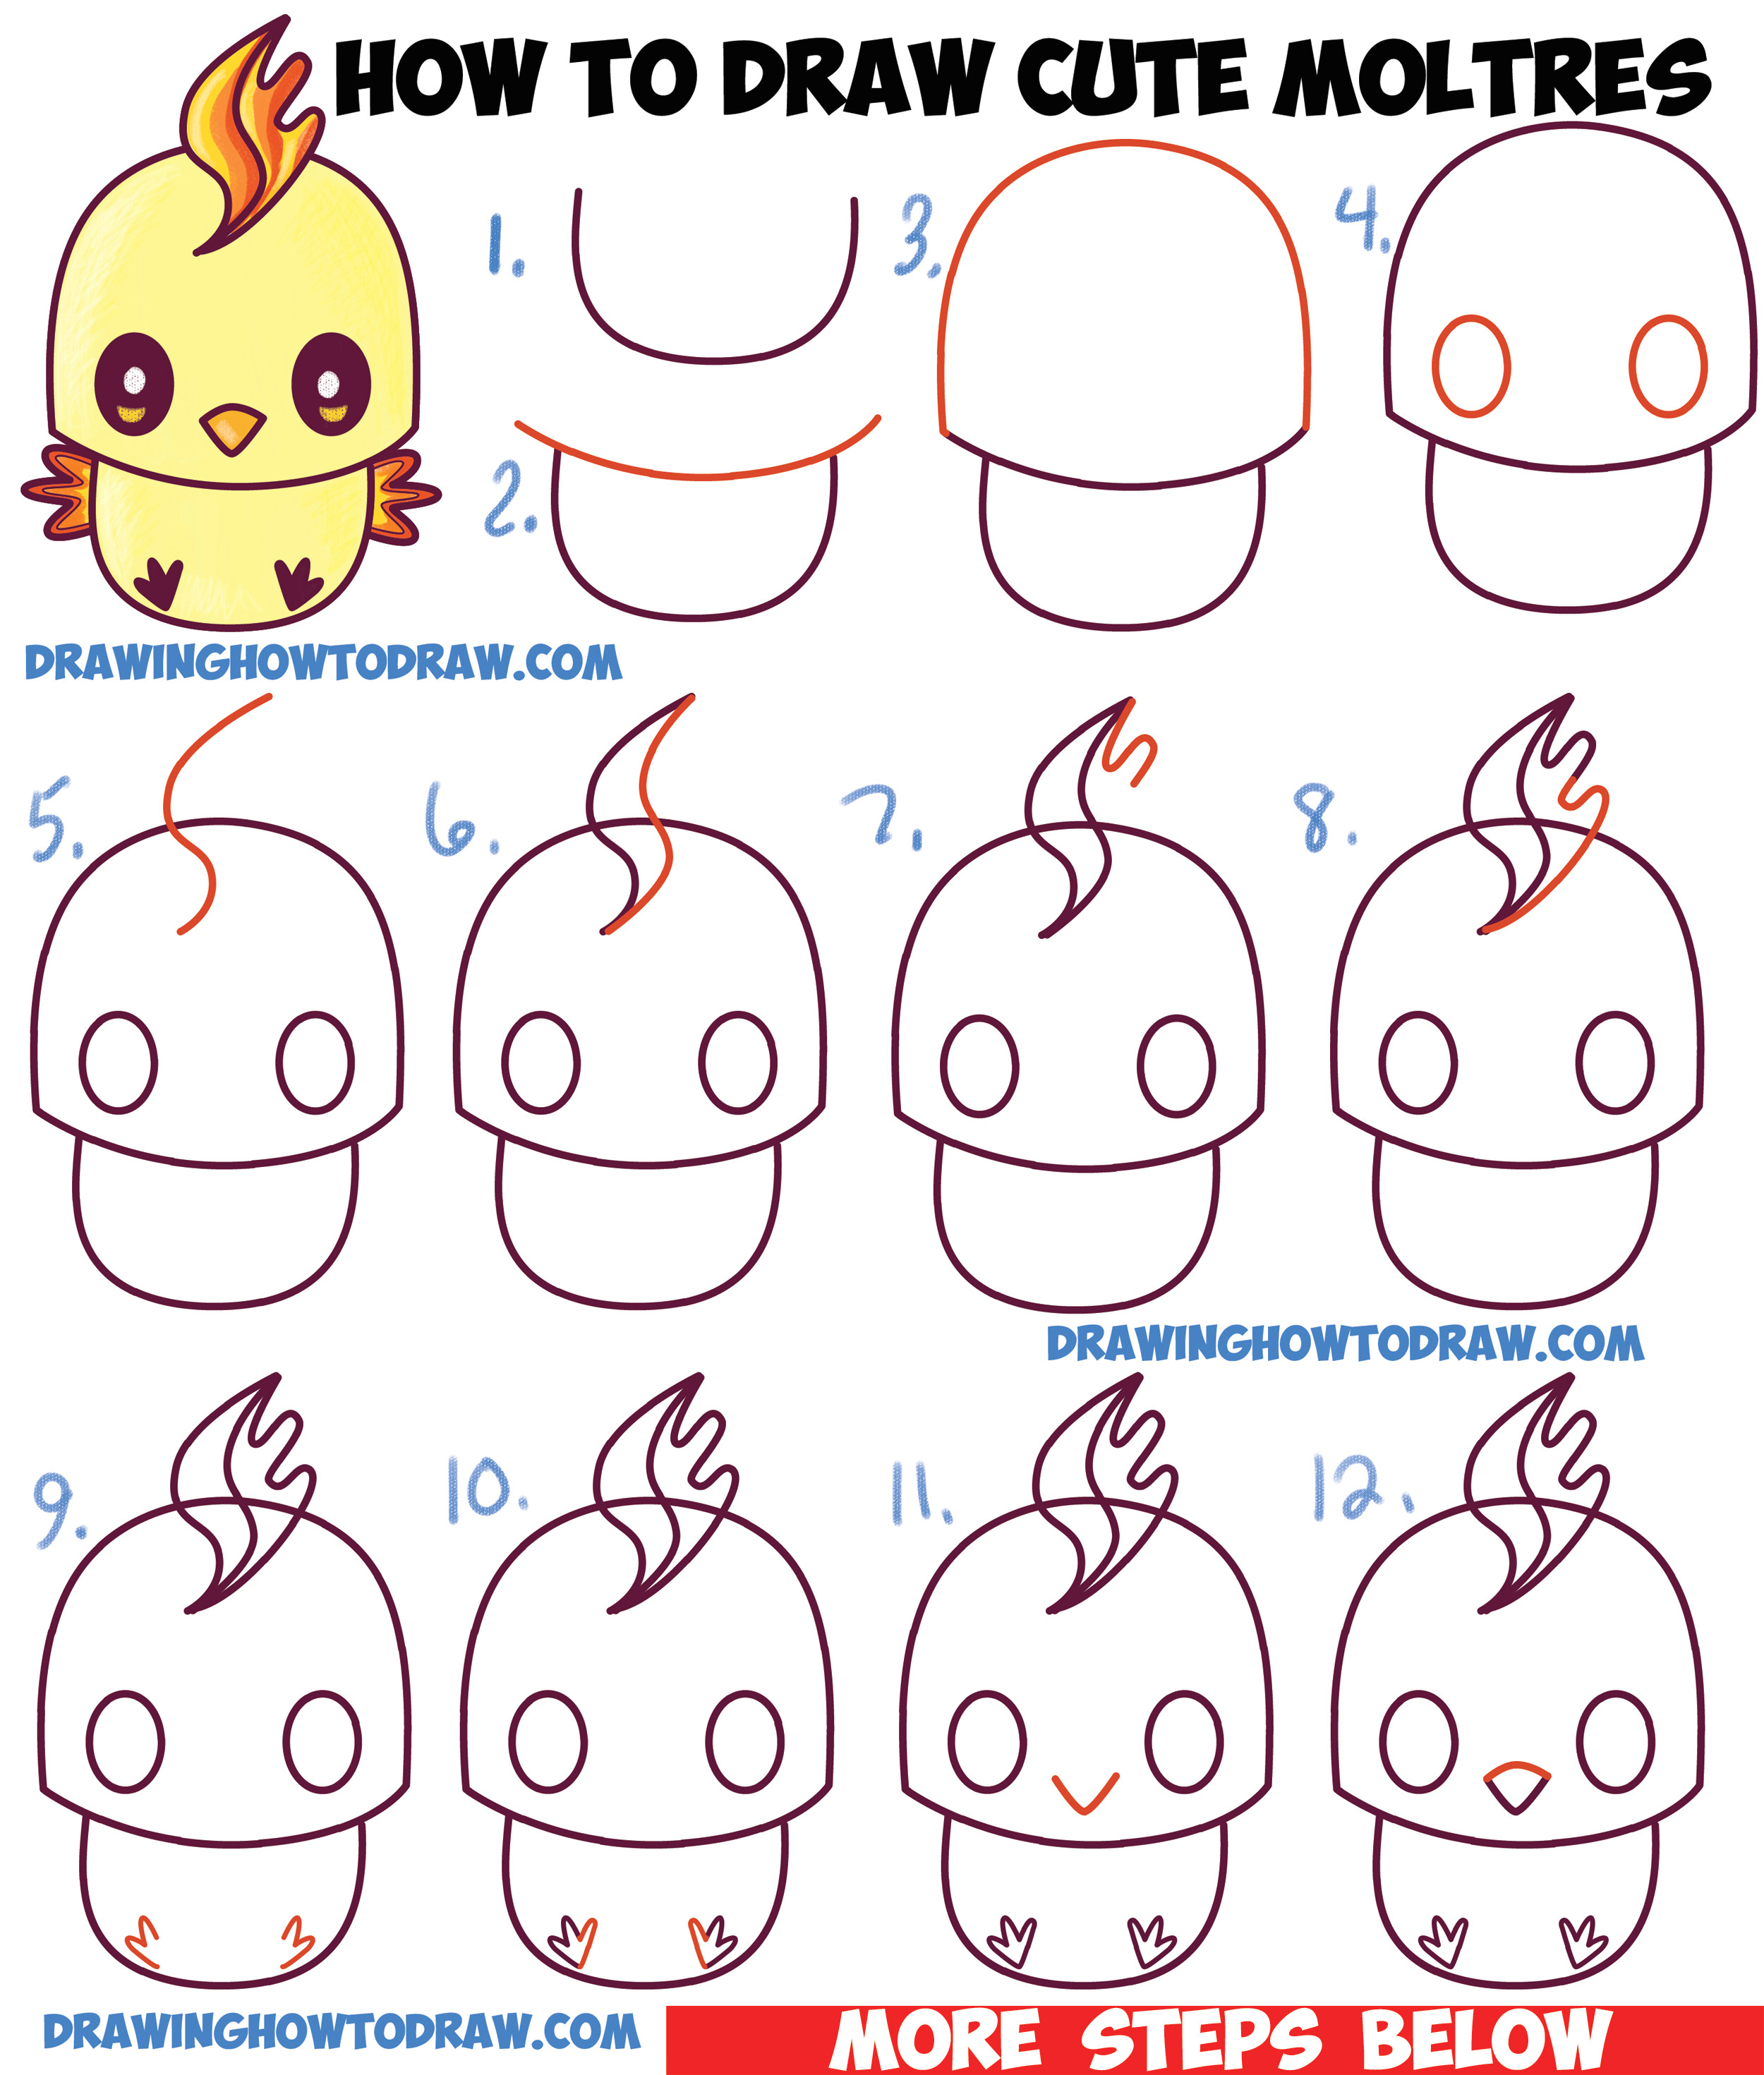 Drawing Cute Fonts How to Draw Cute Kawaii Chibi Moltres From Pokemon In Easy Step